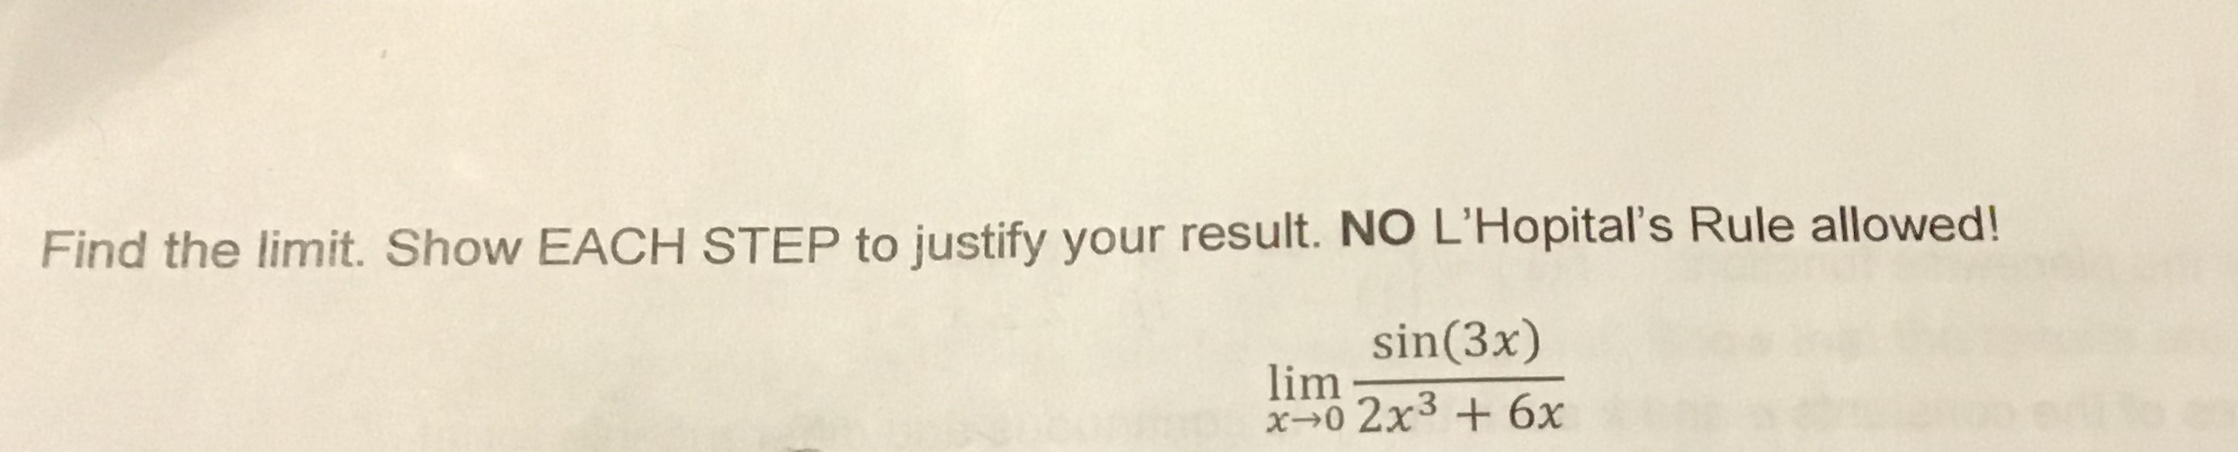 Find the limit. Show EACH STEP to justify your result. NO L'Hopital's Rule allowed!
sin(3x)
lim
x0 2x36x
